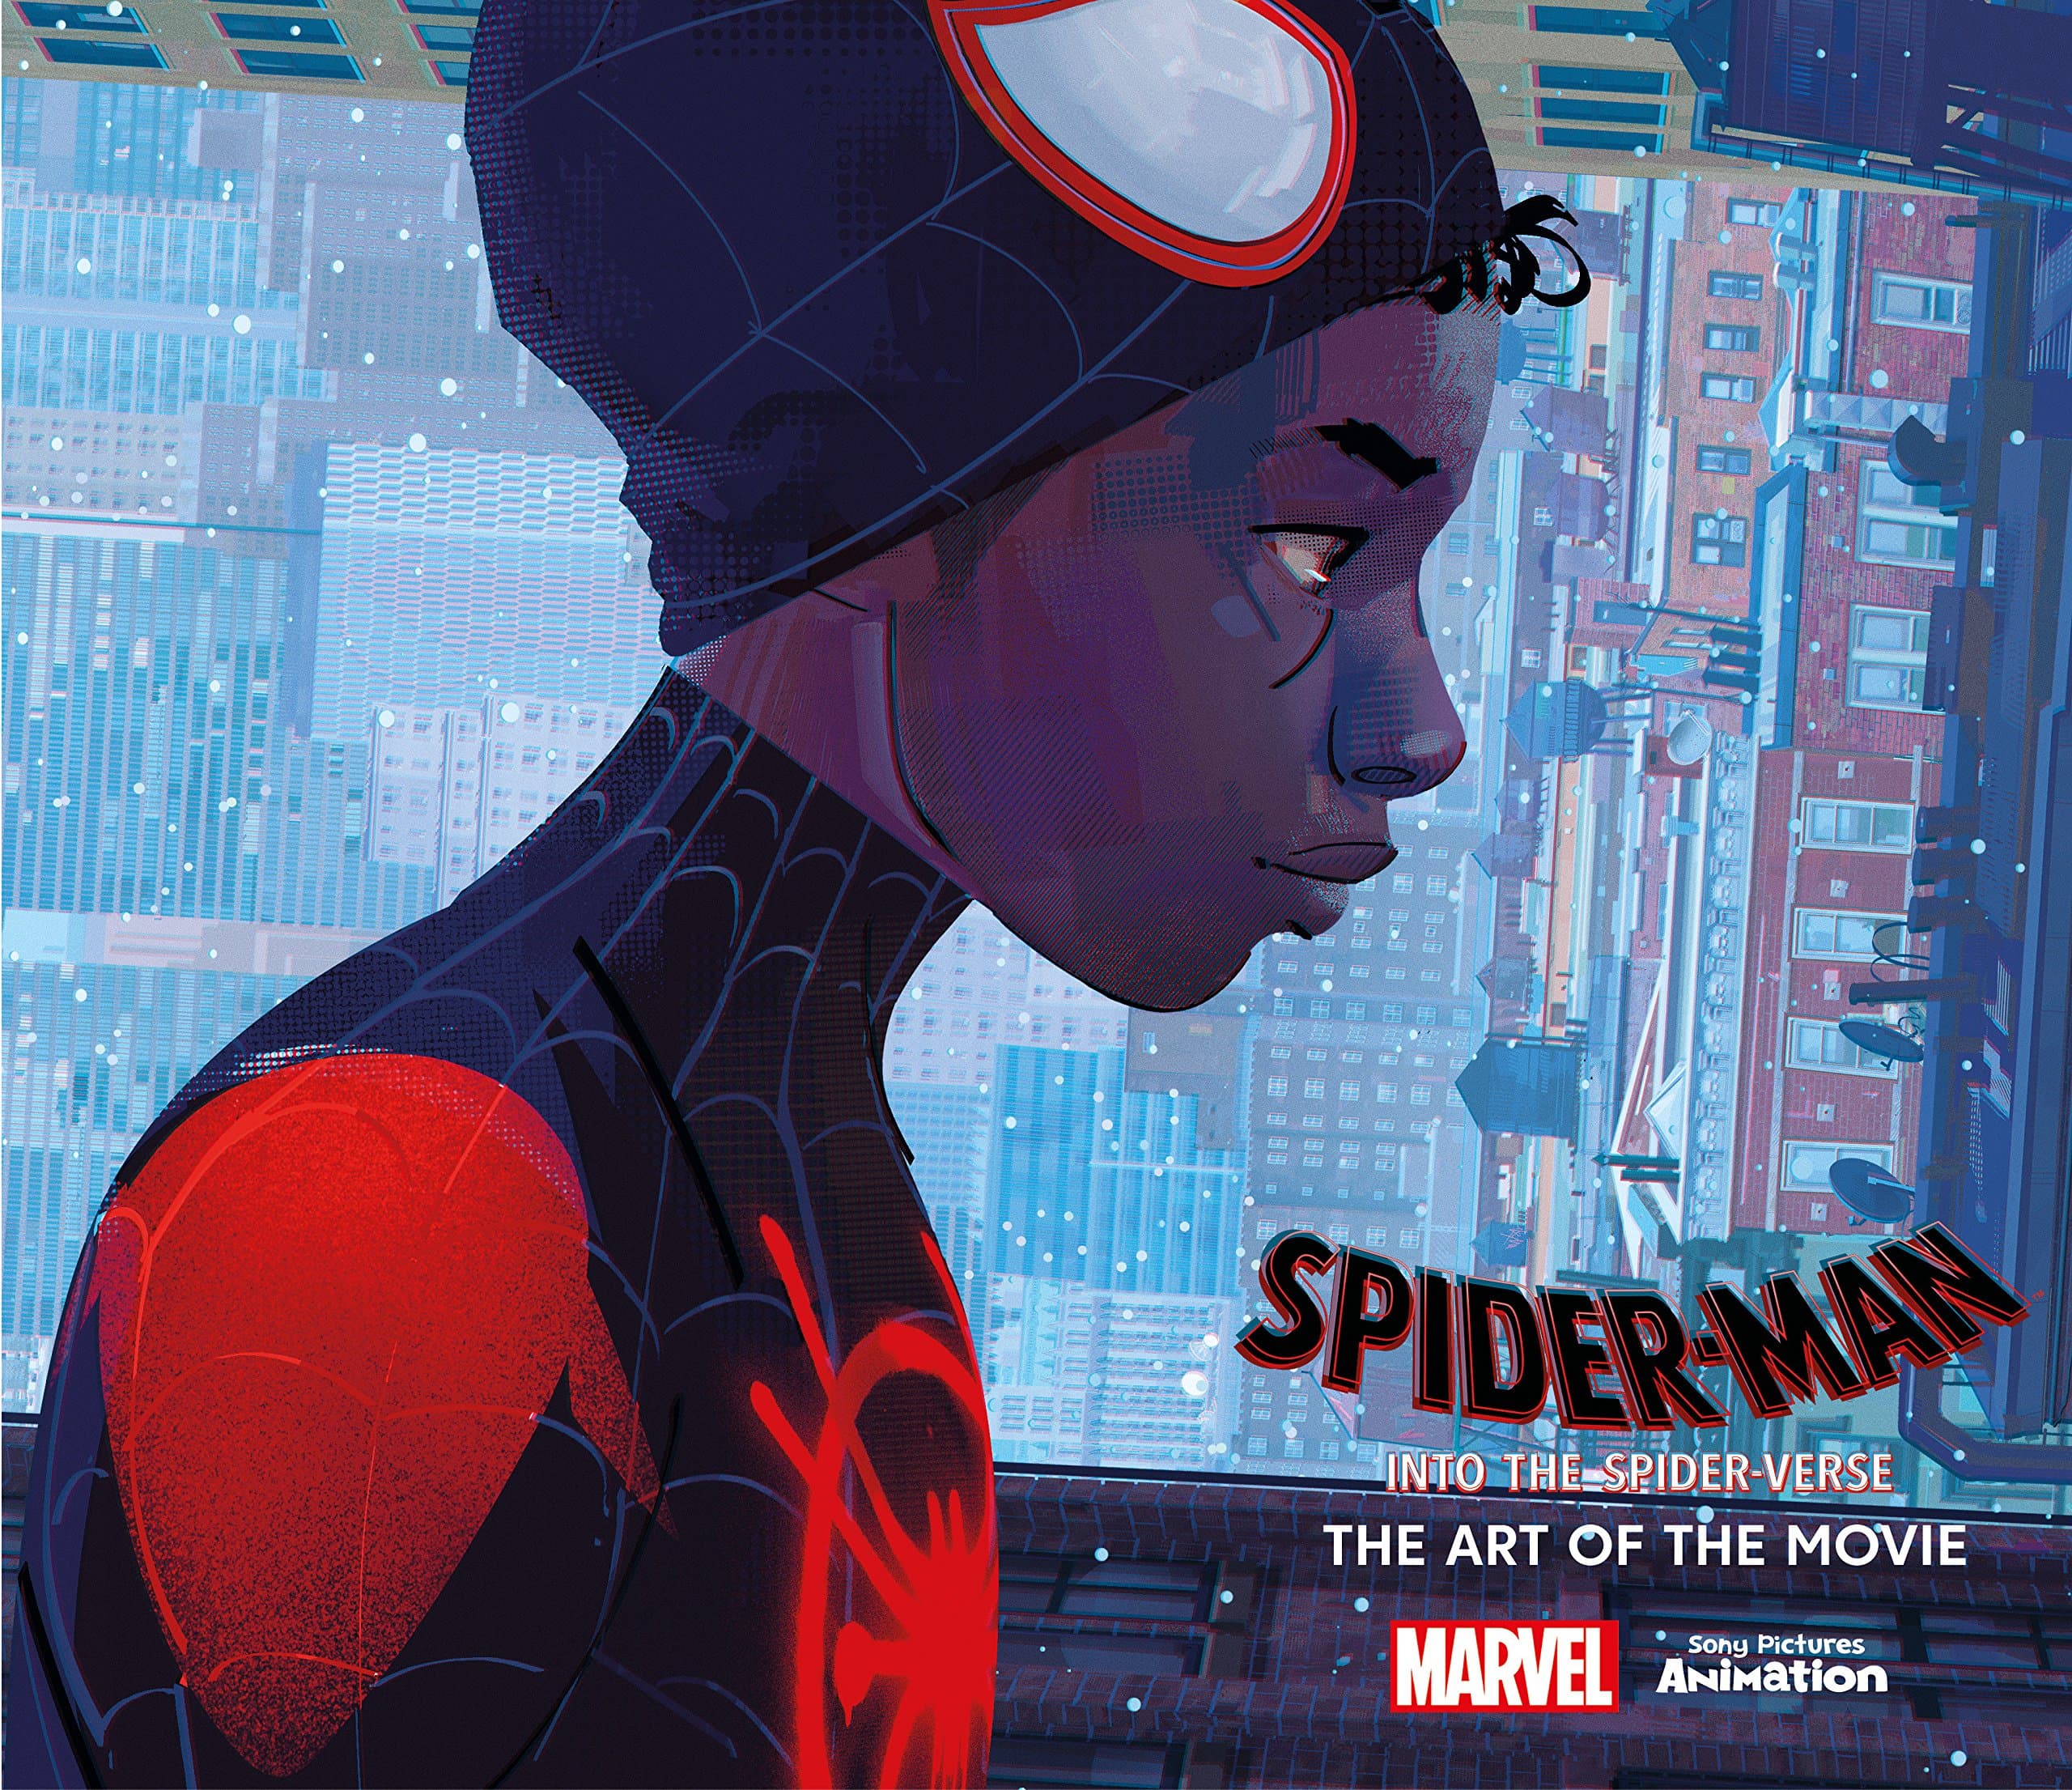 "Spider-Man: Into the Spider-Verse" Art of the Movie Hardcover